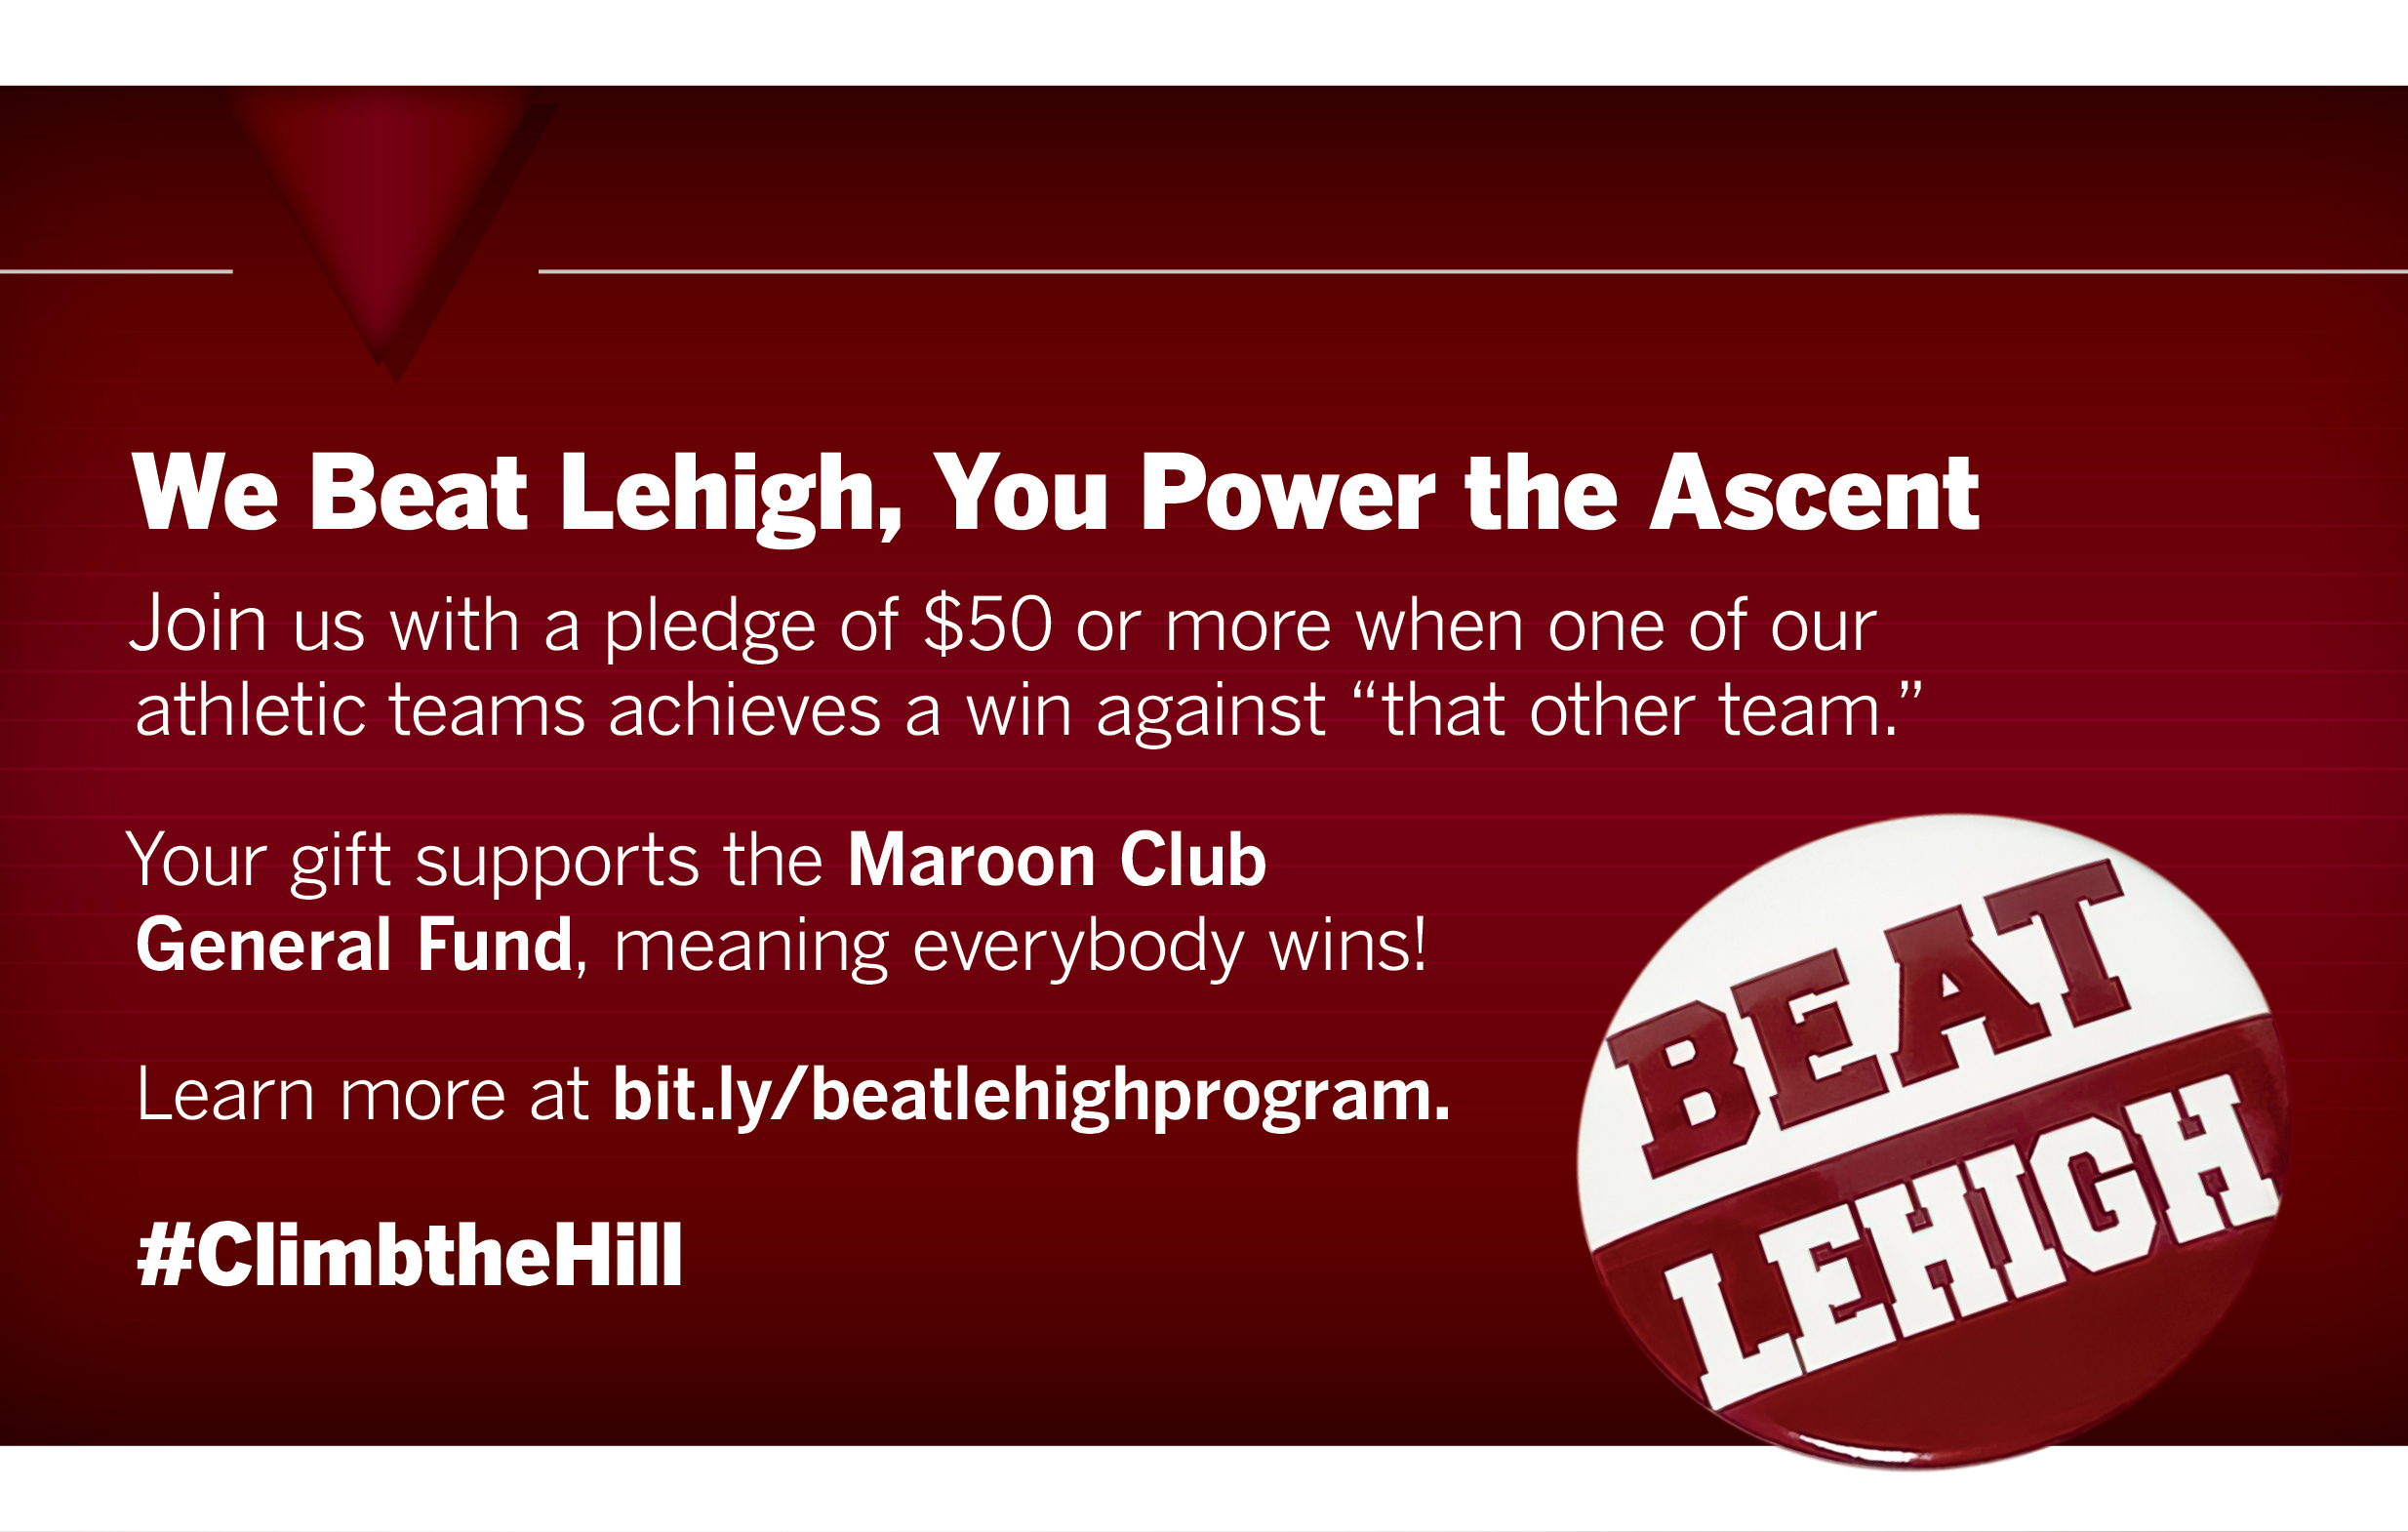 Beat Lehigh ad. Your donatiion supports the Maroon Club General Fund meaning everybody wins.